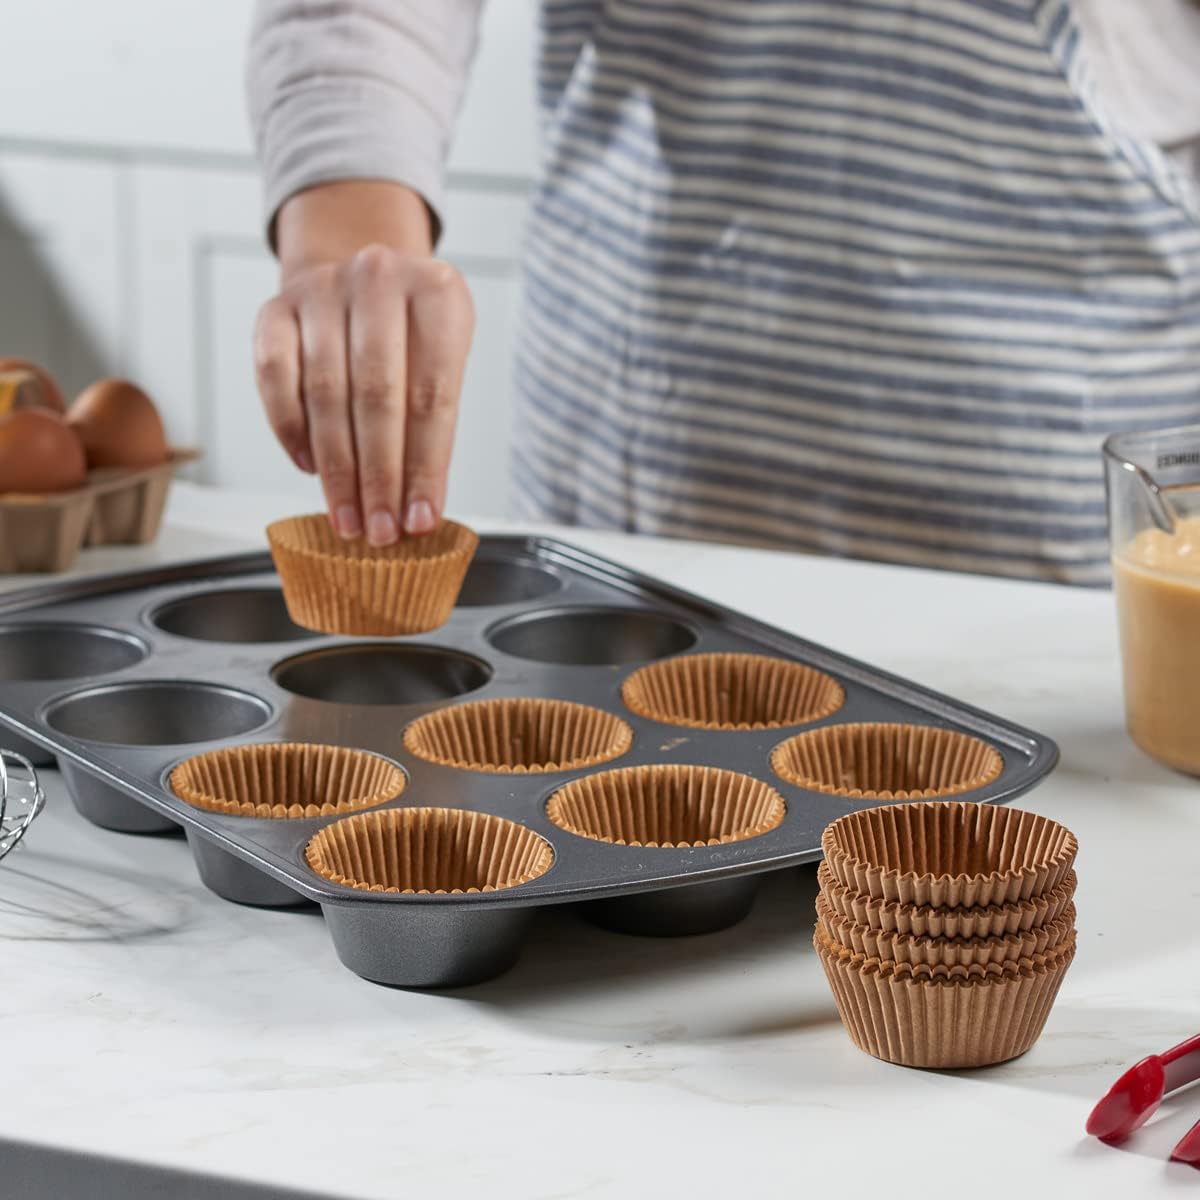 

300pcs Standard Size Baking Cups Disposable Cake Cups Food-grade Greaseproof Paper Cupcake Liners Muffin Cups Kitchen Baking Tools